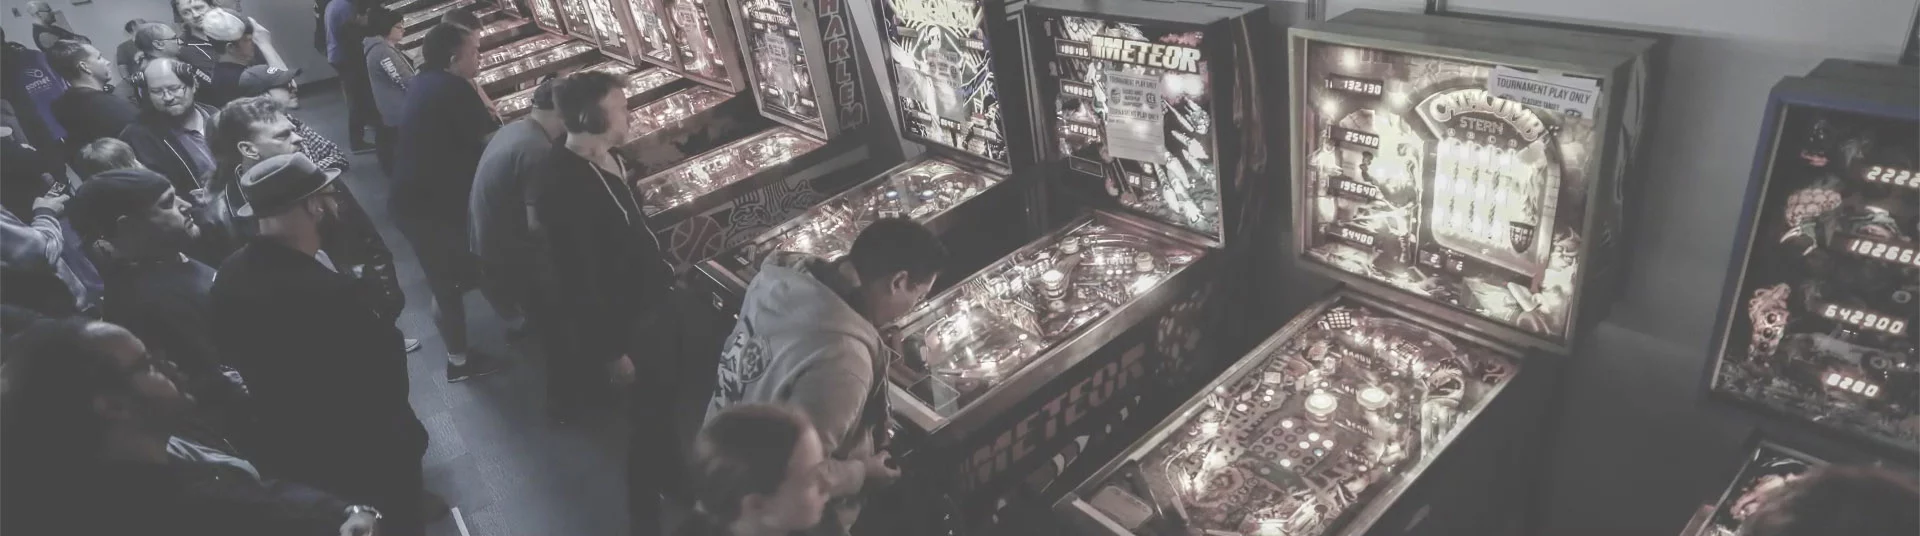 Pinball Wizards! Using WooCommerce Subscriptions to manage new pinball tracking technology.